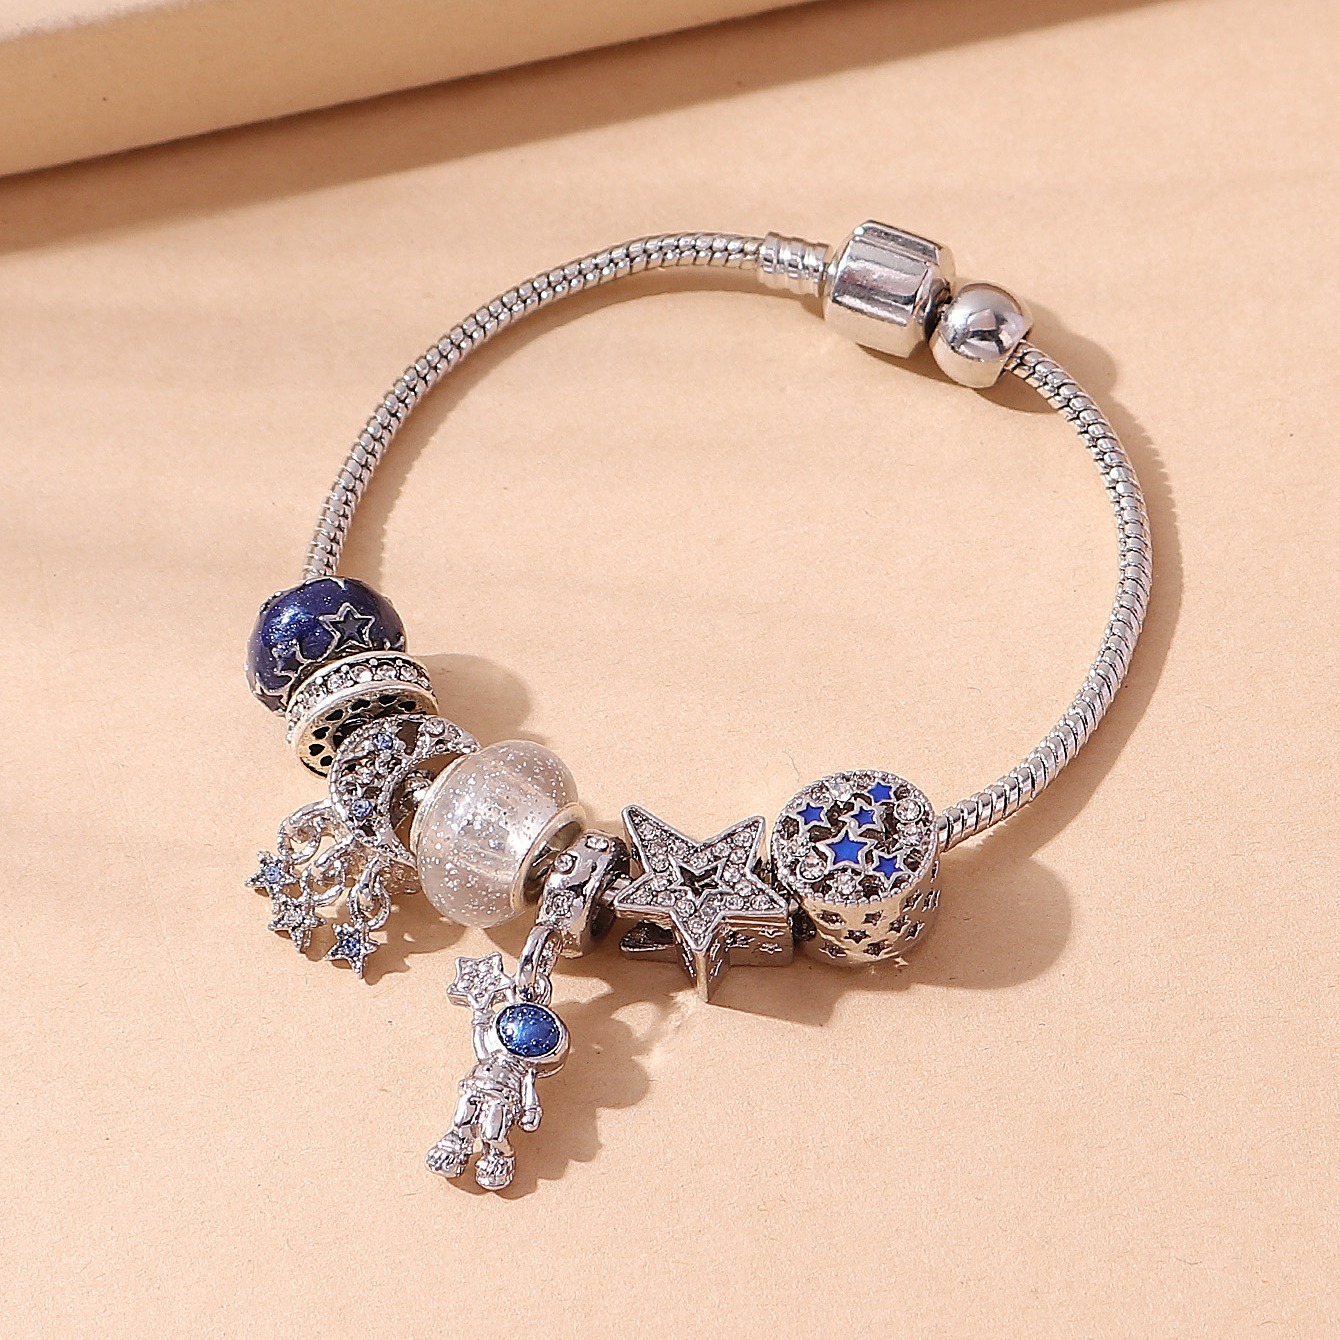 'Cheap Blue Starry Sky Copper Bracelet with Faux Diamonds Rhinestone and Moon Astronauts DIY Beaded'